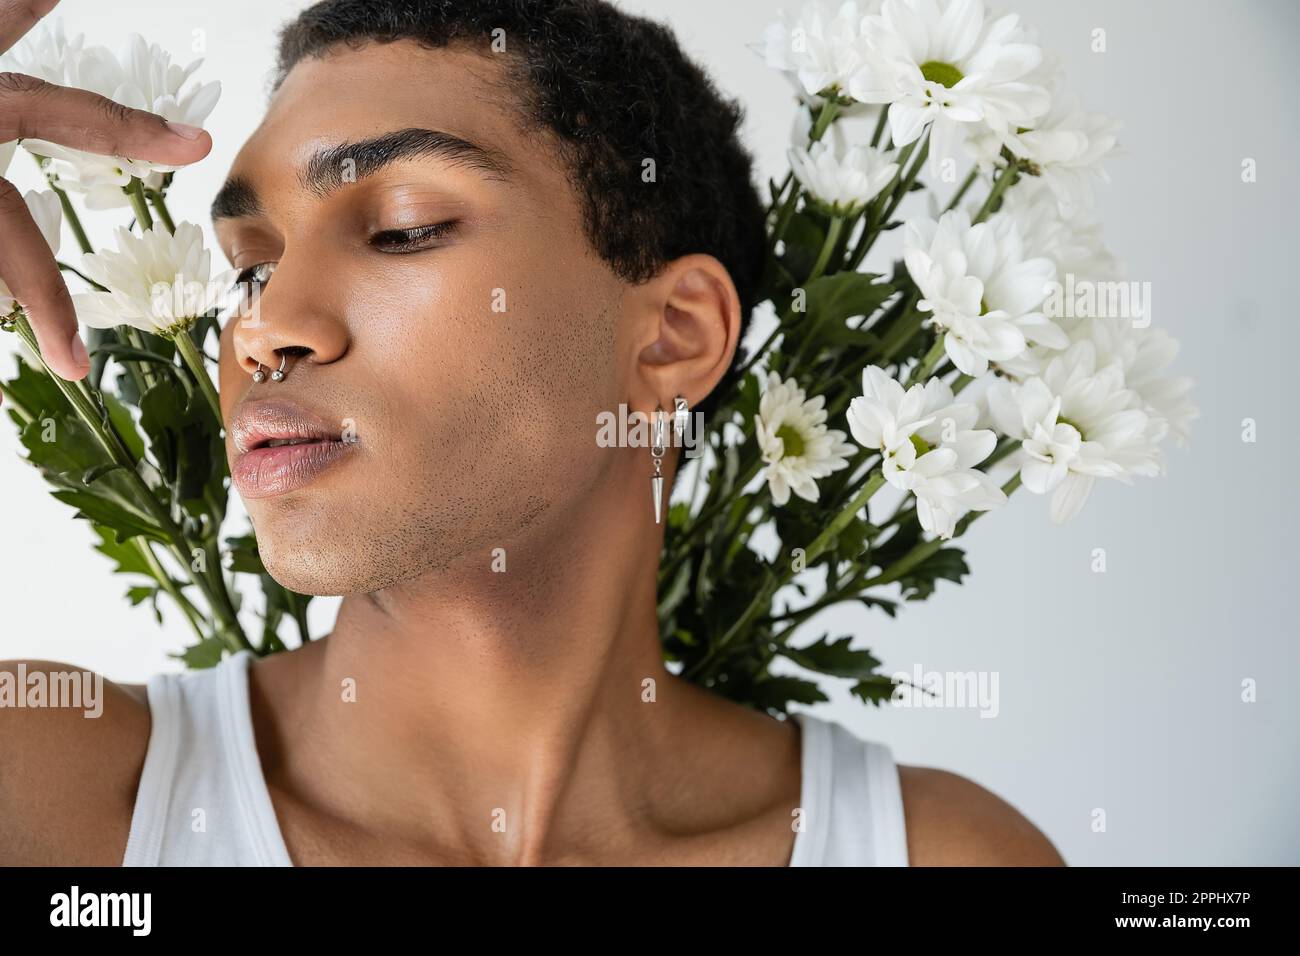 portrait of african american man with silver piercing posing near white fresh flowers isolated on grey,stock image Stock Photo